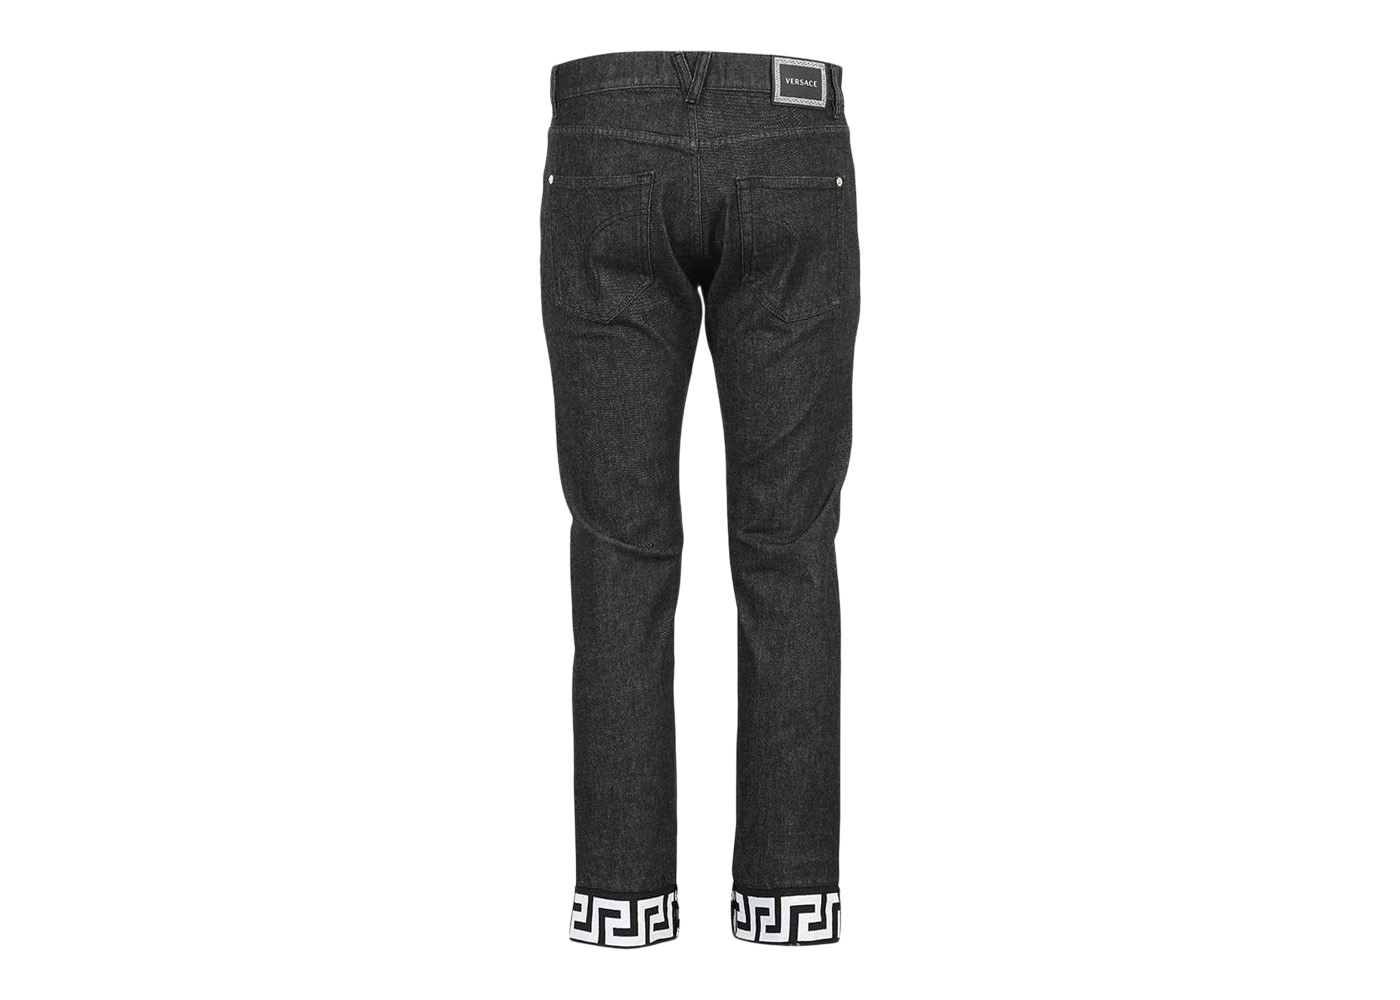 Plain Denim Mid Rising Stretch Slim Fit Mens Jeans With 4 Pockets Fabric  Weight: 500 Grams (G) at Best Price in New Delhi | Saurav Enterprises